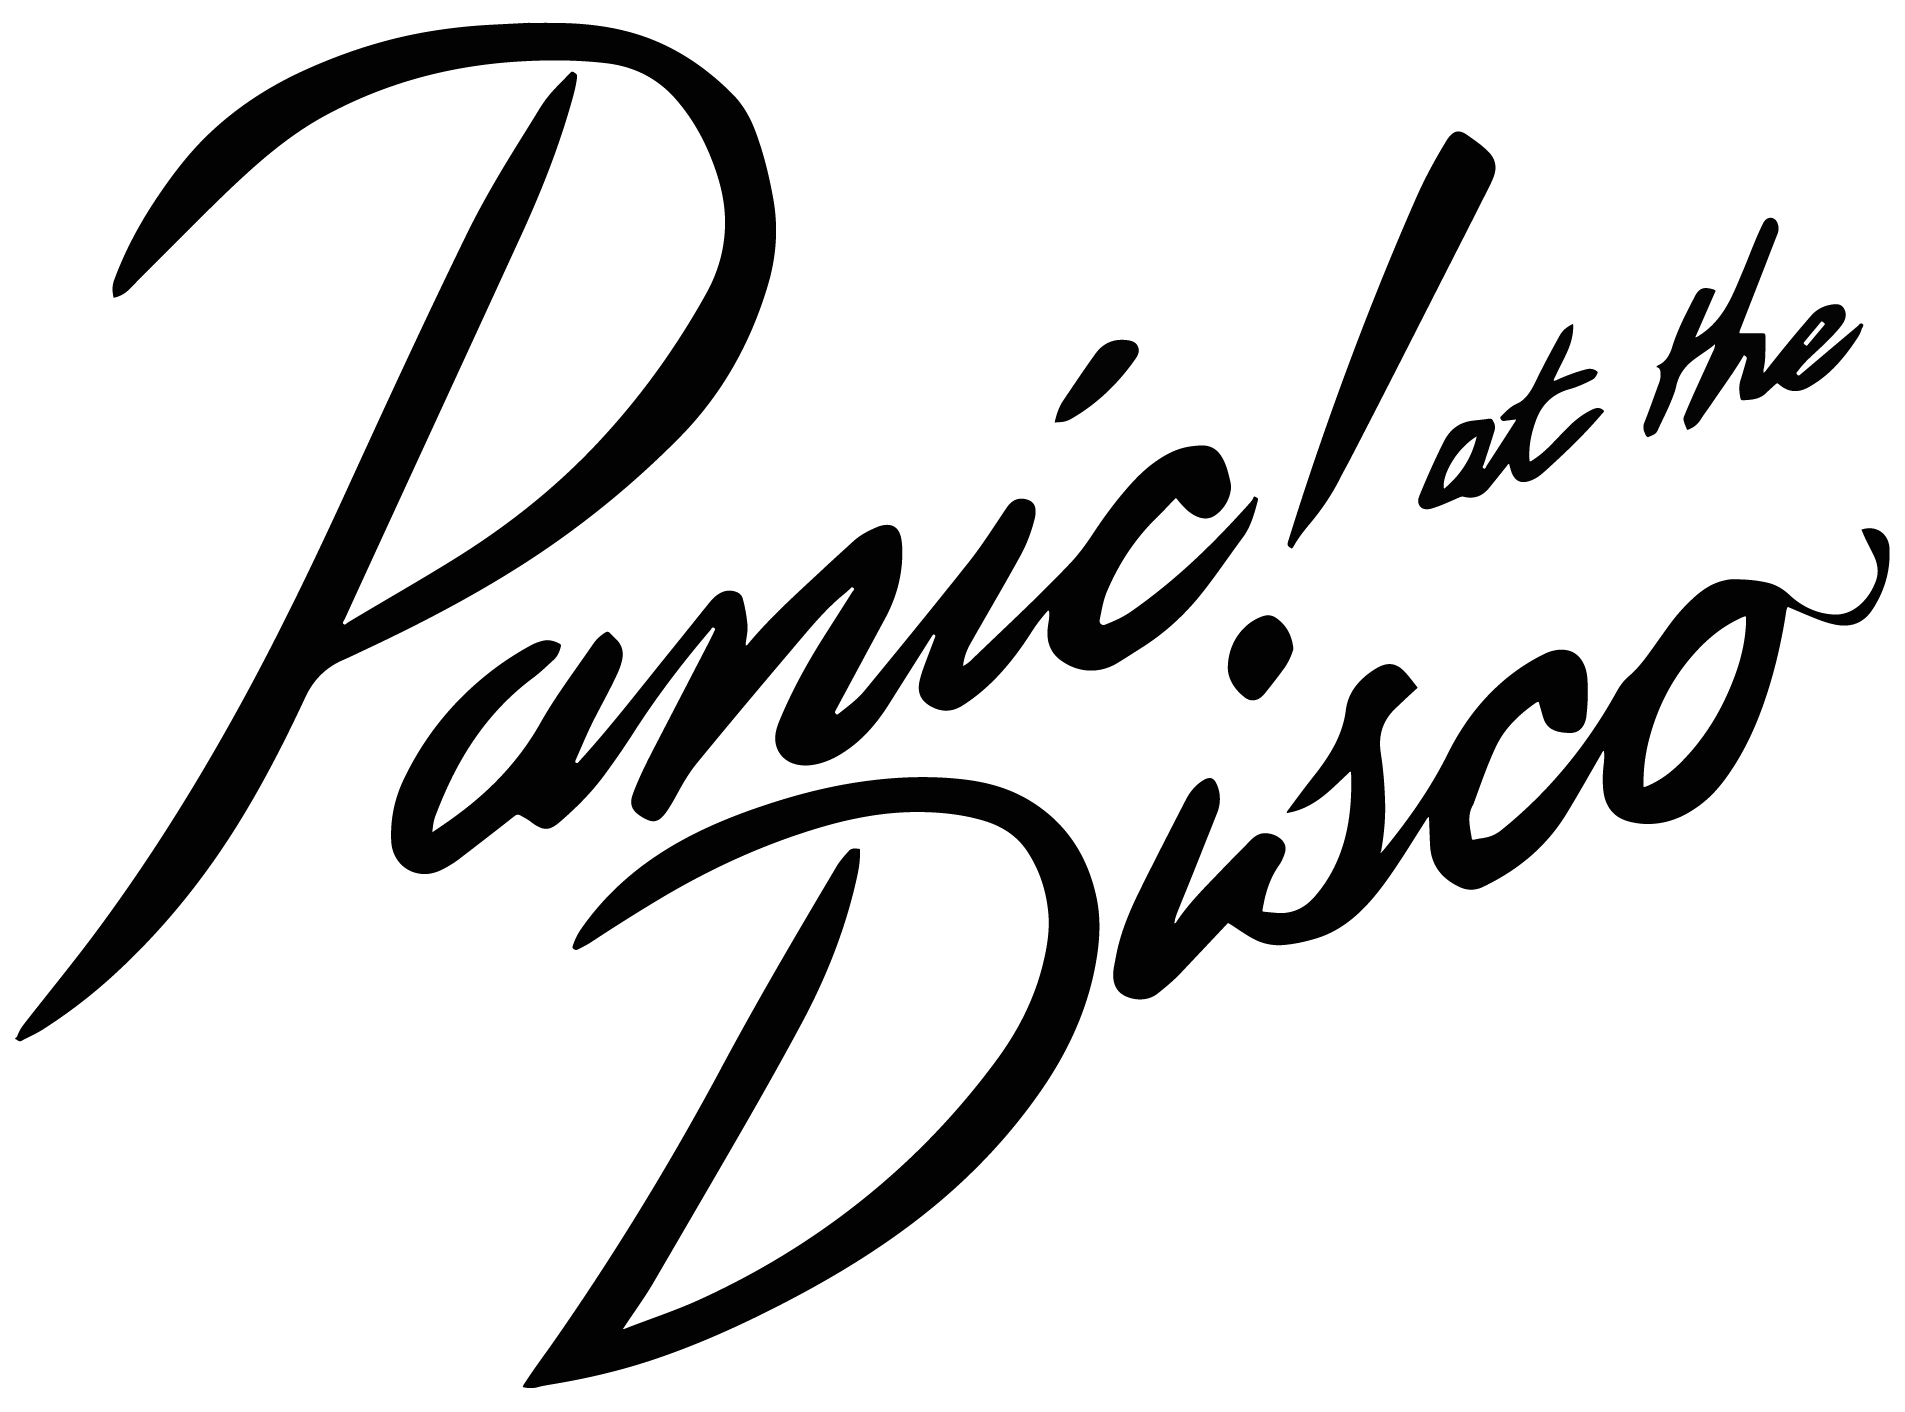 Panic at the Disco Logo, Panic at the Disco Symbol, Meaning